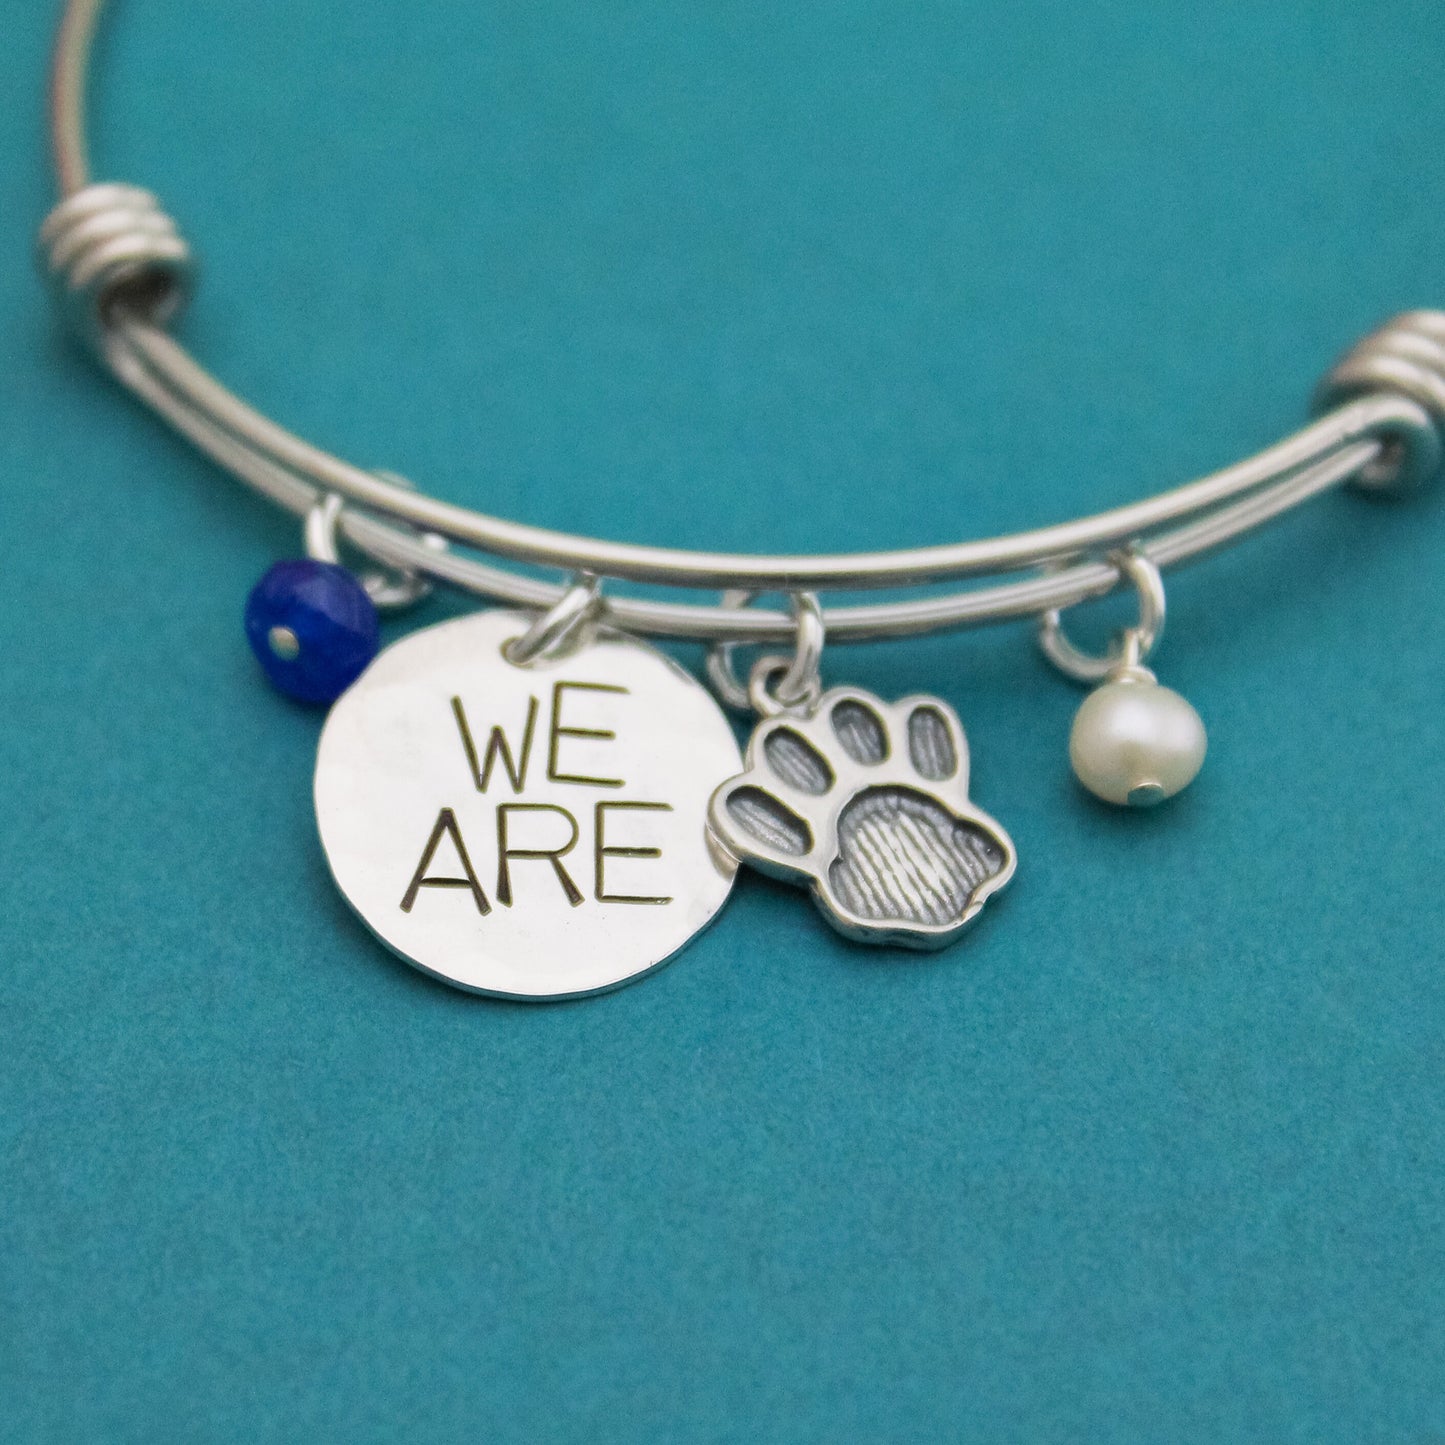 We Are Bangle, Penn State Bracelet, Nittany Lions Gift, PSU Grad Gift, Graduation Gift for Penn State, Hand Stamped Jewelry